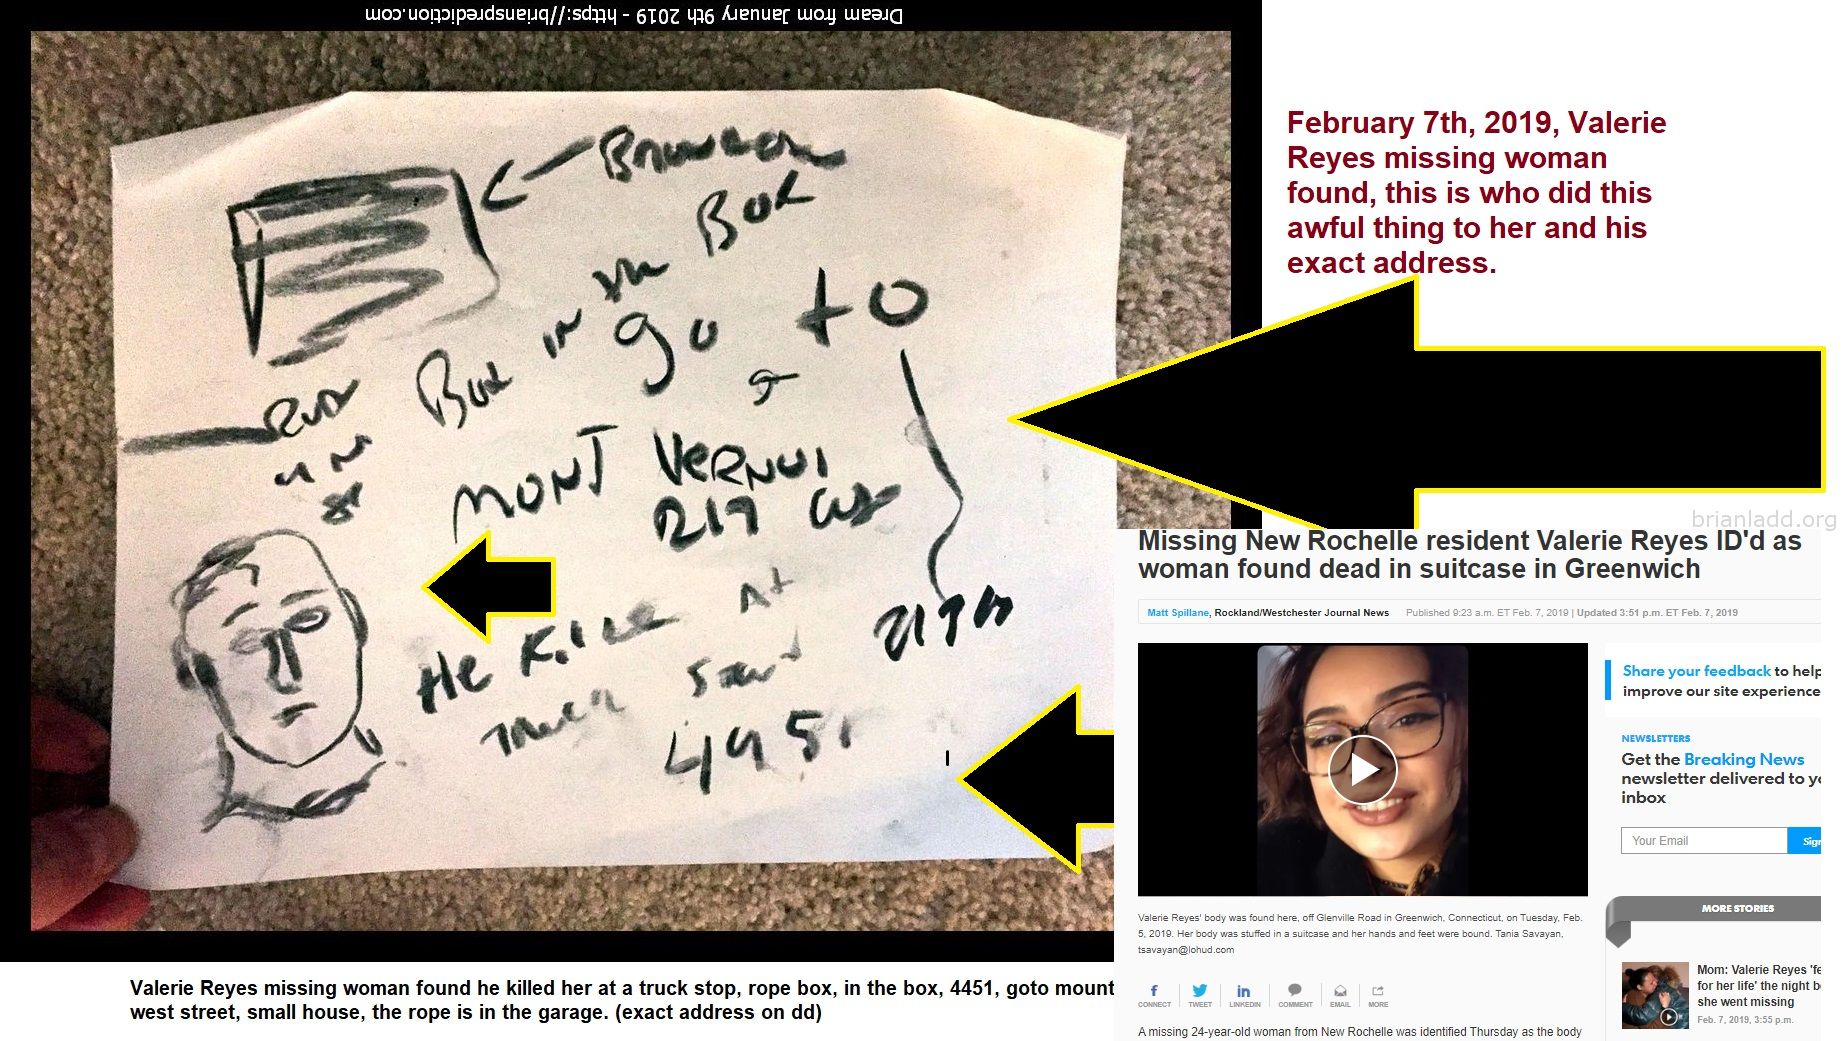 Valerie Reyes Missing Woman Found By Psychic Brian Ladd - February 7th, 2019, Valerie Reyes Missing Woman Found, This Is...
February 7th, 2019, Valerie Reyes Missing Woman Found, This Is Who Did This Awful Thing To Her And His Exact Address.  Missing New Rochelle Resident Valerie Reyes Id'D As Woman Found Dead In Suitcase In Greenwich  Matt Spillane, Rockland/Westchester Journal News Published 9:23 A.M. Et Feb. 7, 2019 | Updated 3:51 P.M. Et Feb. 7, 2019  Valerie Reyes' Body Was Found Here, Off Glenville Road In Greenwich, Connecticut, On Tuesday, Feb. 5, 2019. Her Body Was Stuffed In A Suitcase And Her Hands And Feet Were Bound. Tania Savayan, Tsavayan@Lohud.Com  Connect  Tweet  Linkedin  Comment  Email  More  A Missing 24-Year-Old Woman From New Rochelle Was Identified Thursday As The Body Stuffed Into A Red Suitcase, Bound At The Wrists And Ankles And Dumped On The Side Of A Road In Greenwich, Connecticut, Police Said.  Valerie Reyes Had Been Missing Since Jan. 29, Greenwich Police Said. The Red Suitcase With Her Body Inside Â€” Which Made National Headlines After Being Found Tuesday Morning Â€” Was Found In A Wooded Area Along Glenville Road, About One Mile East Of The Merritt Parkway Near The Westchester Border.  Reyes' Family Was Notified On Wednesday Night, Police Said.  Friends And Family Are Looking For New Rochelle Woman Valerie Reyes, Who'S Been Missing Since Tuesday.  Friends And Family Are Looking For New Rochelle Woman Valerie Reyes, Who'S Been Missing Since Tuesday. (Photo: Submitted)  "They Are Obviously Devastated By The Loss Of Valerie And Our Heartfelt Condolences Go Out To Them,&Quot; Police Said In A Statement.  Family And Friends Are Planning A Vigil For Reyes At 5 P.M. Today At Glen Island Park, Weyman Avenue In New Rochelle  Reyes Was A 2012 Graduate Of New Rochelle High School. She Worked At The Barnes & Noble In Eastchester At The Vernon Hills Shopping Center.  "The Entire Barnes & Noble Community Is Grieving The Loss Of Our Beloved Employee Valerie Reyes,&Quot; Barnes & Noble Said In A Statement, Adding That She Worked At The Eastchester Store Since It Opened Two-And-A-Half Years Ago. "Our Hearts Go Out To Her Family, Friends, And Coworkers During This Difficult Time.  Investigators Examine The Suitcase Containing The Body Of Missing New Rochelle Resident Valerie Reyes Off Glenville Road In Greenwich, Connecticut, In This Photo From A News Helicopter,Tuesday, Feb. 5, 2019.  Investigators Examine The Suitcase Containing The Body Of Missing New Rochelle Resident Valerie Reyes Off Glenville Road In Greenwich, Connecticut, In This Photo From A News Helicopter,Tuesday, Feb. 5, 2019. (Photo: Nbc 4 New York)  Reyes' Body Was Found At 8:23 A.M. Tuesday Off The Shoulder Of Glenville Road, Just North Of Stillman Lane In The Glenville Section Of Greenwich, Police Said. A Town Highway Worker Saw Her Body In A Suitcase About 15 Feet Off The Side Of The Road And Notified Police.  Friends And Family Are Looking For New Rochelle Woman Valerie Reyes, Who'S Been Missing Since Tuesday.  Friends And Family Are Looking For New Rochelle Woman Valerie Reyes, Who'S Been Missing Since Tuesday. (Photo: Submitted)  Reyes' Cause Of Death Has Not Yet Been Confirmed By The Medical Examiner, Police Said. Police Said Previously That Reyes Did Not Die At The Location Where She Was Found, But They Were Not Yet Sure How Or When She Was Killed.  Valerie Reyes: What We Know, What We Don'T Know About Death Of Woman Whose Body Was Found In Suitcase  Body Found: Woman Found Dead, Bound In Suitcase, On Side Of Connecticut Road, Police Say  Missing Woman: Friends, Family Looking For Missing 24-Year-Old New Rochelle Woman  "Many Pieces Of Possible Physical Evidence Were Collected And Results From Forensic Analysis Are Pending,&Quot; Police Said Today.  Greenwich Officials Said An Employee Of The Town'S Department Of Public Works Is On Paid Administrative Leave After Taking Photos Of Reyes' Body And The Crime Scene. The Town Is Investigating.  "The Victim Was A Daughter, A Sister And A Cousin Of A Family Who Is Suffering A Tremendous Loss At This Time,&Quot; Greenwich First Selectman Peter Tesei Said In A Statement. "This Thoughtless And Insensitive Behavior By An Employee Is Inexcusable. We Extend Our Heartfelt Condolences To Ms. Reyes' Family."  (Story Continues Below Map)
